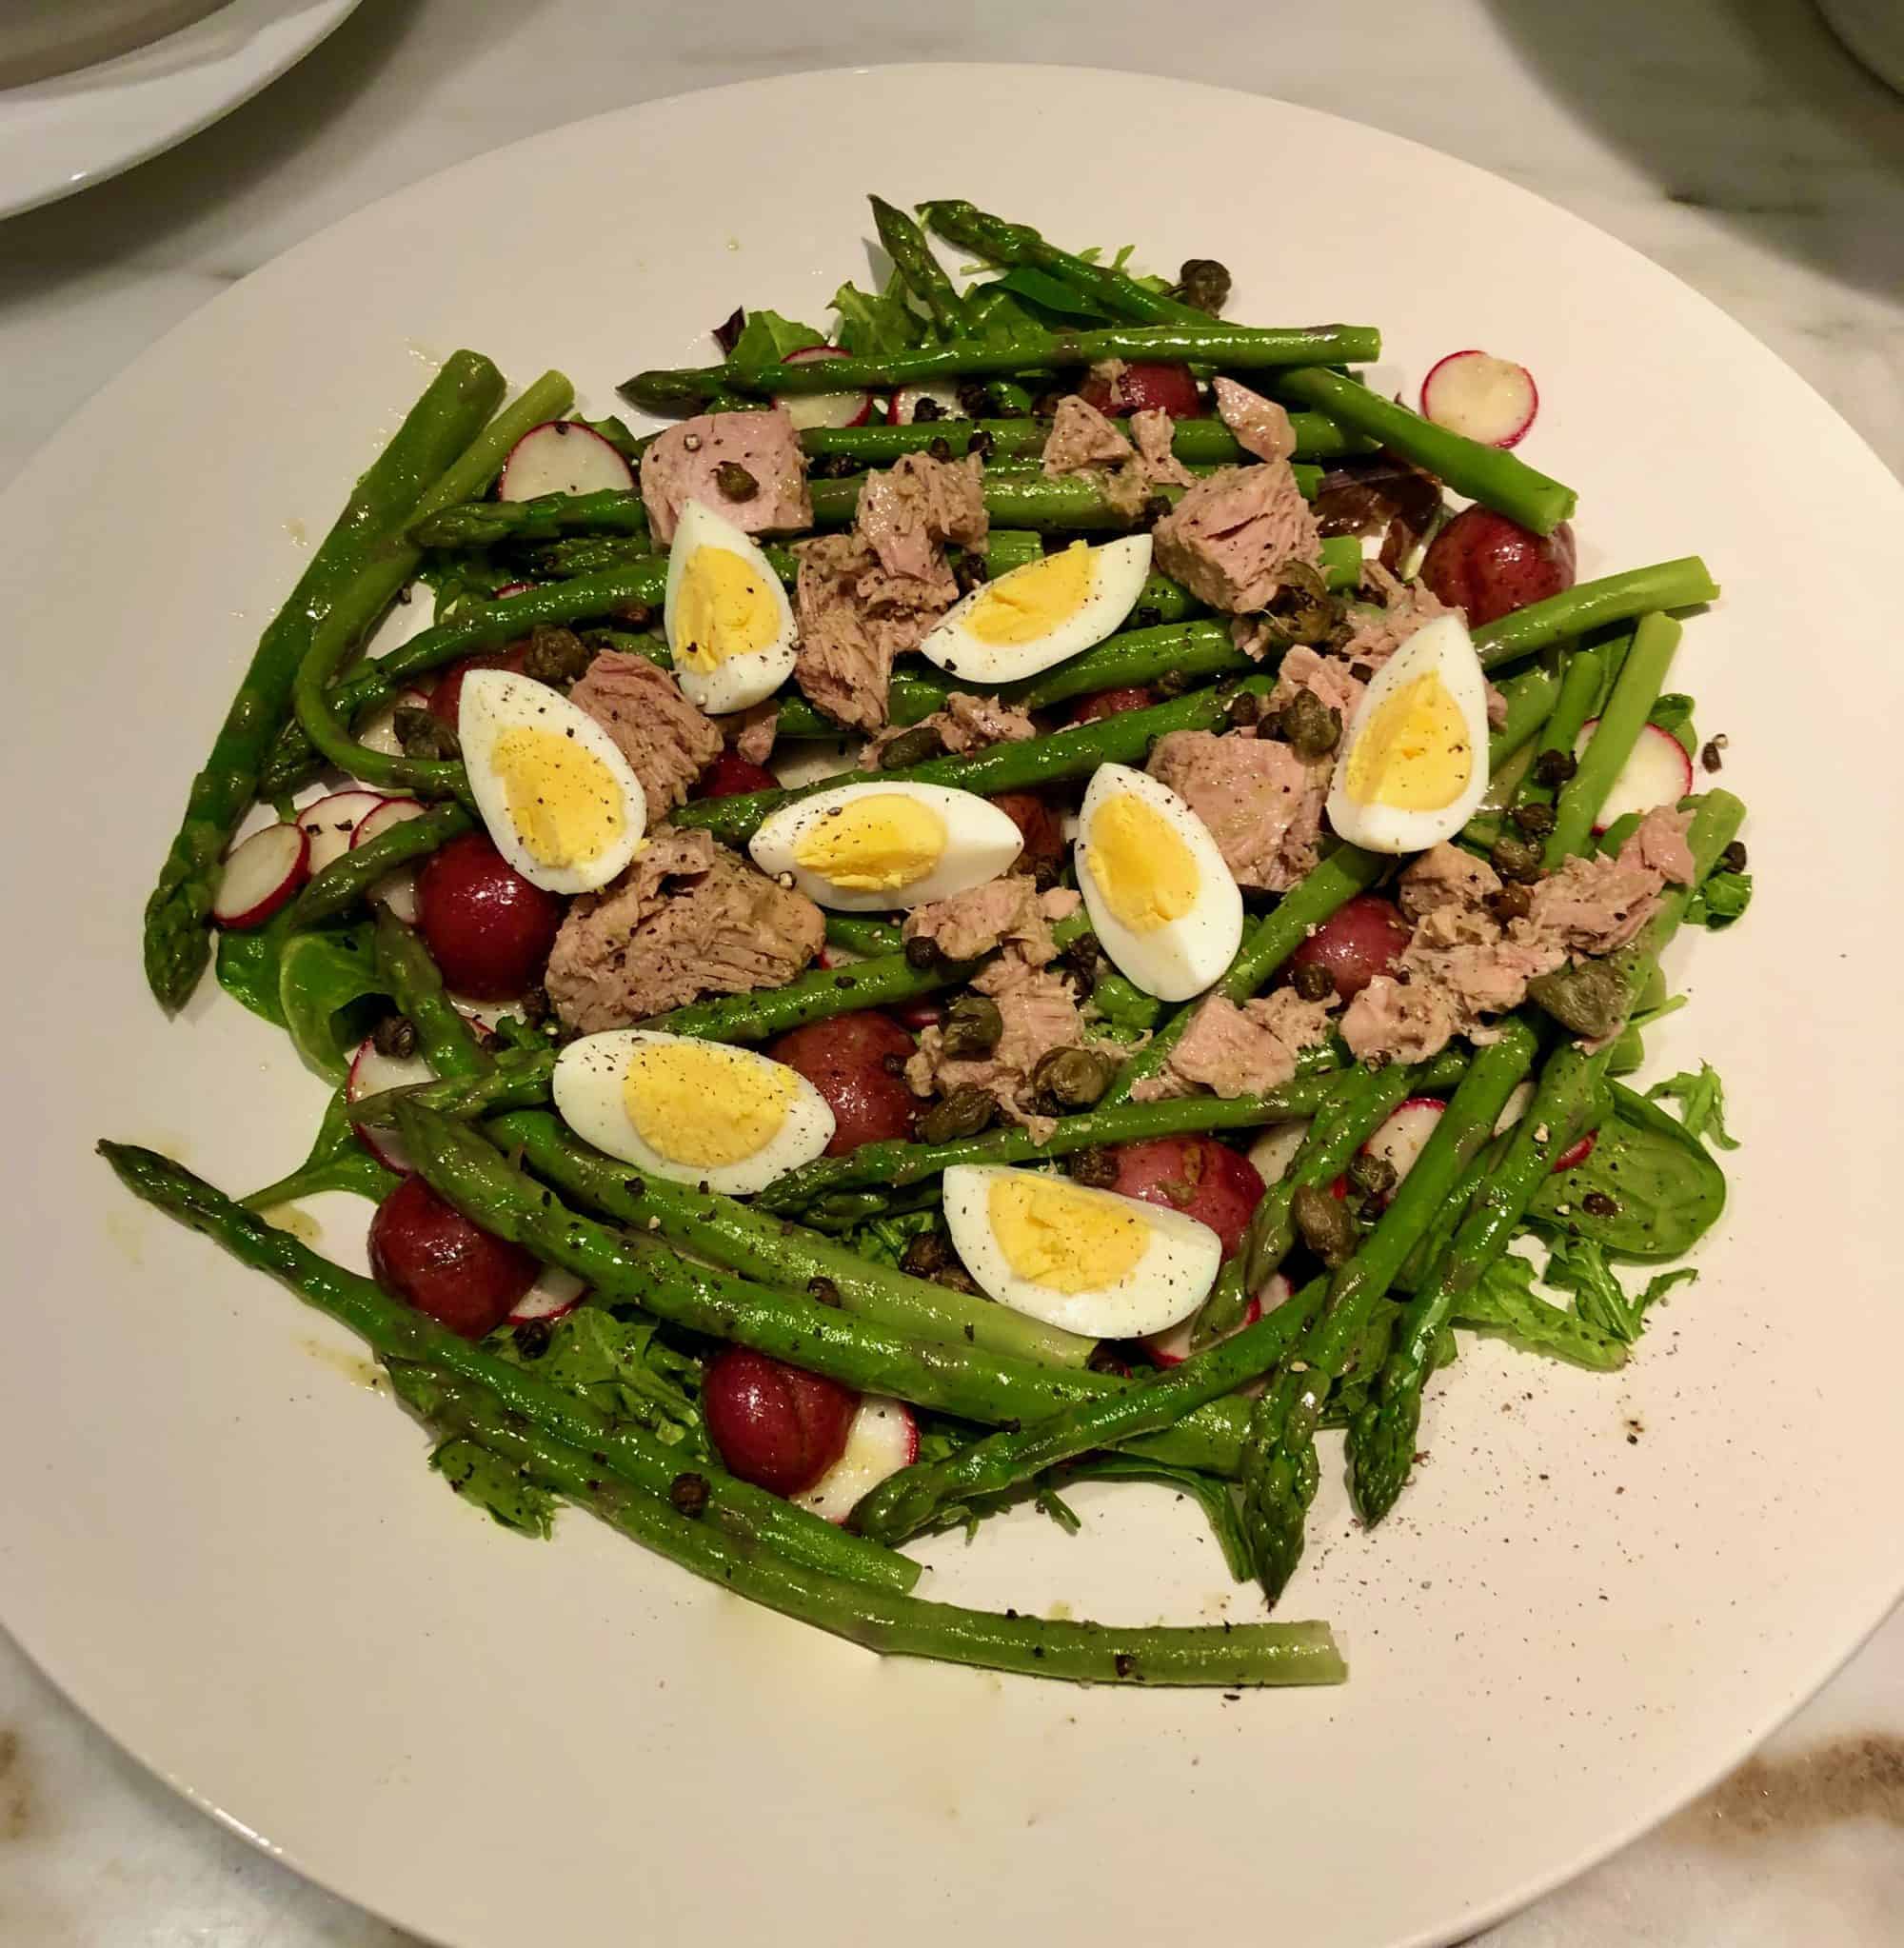 Not quite Niçoise: Tuna, Asparagus and New Potato Salad  with Chive Vinaigrette and Fried Capers